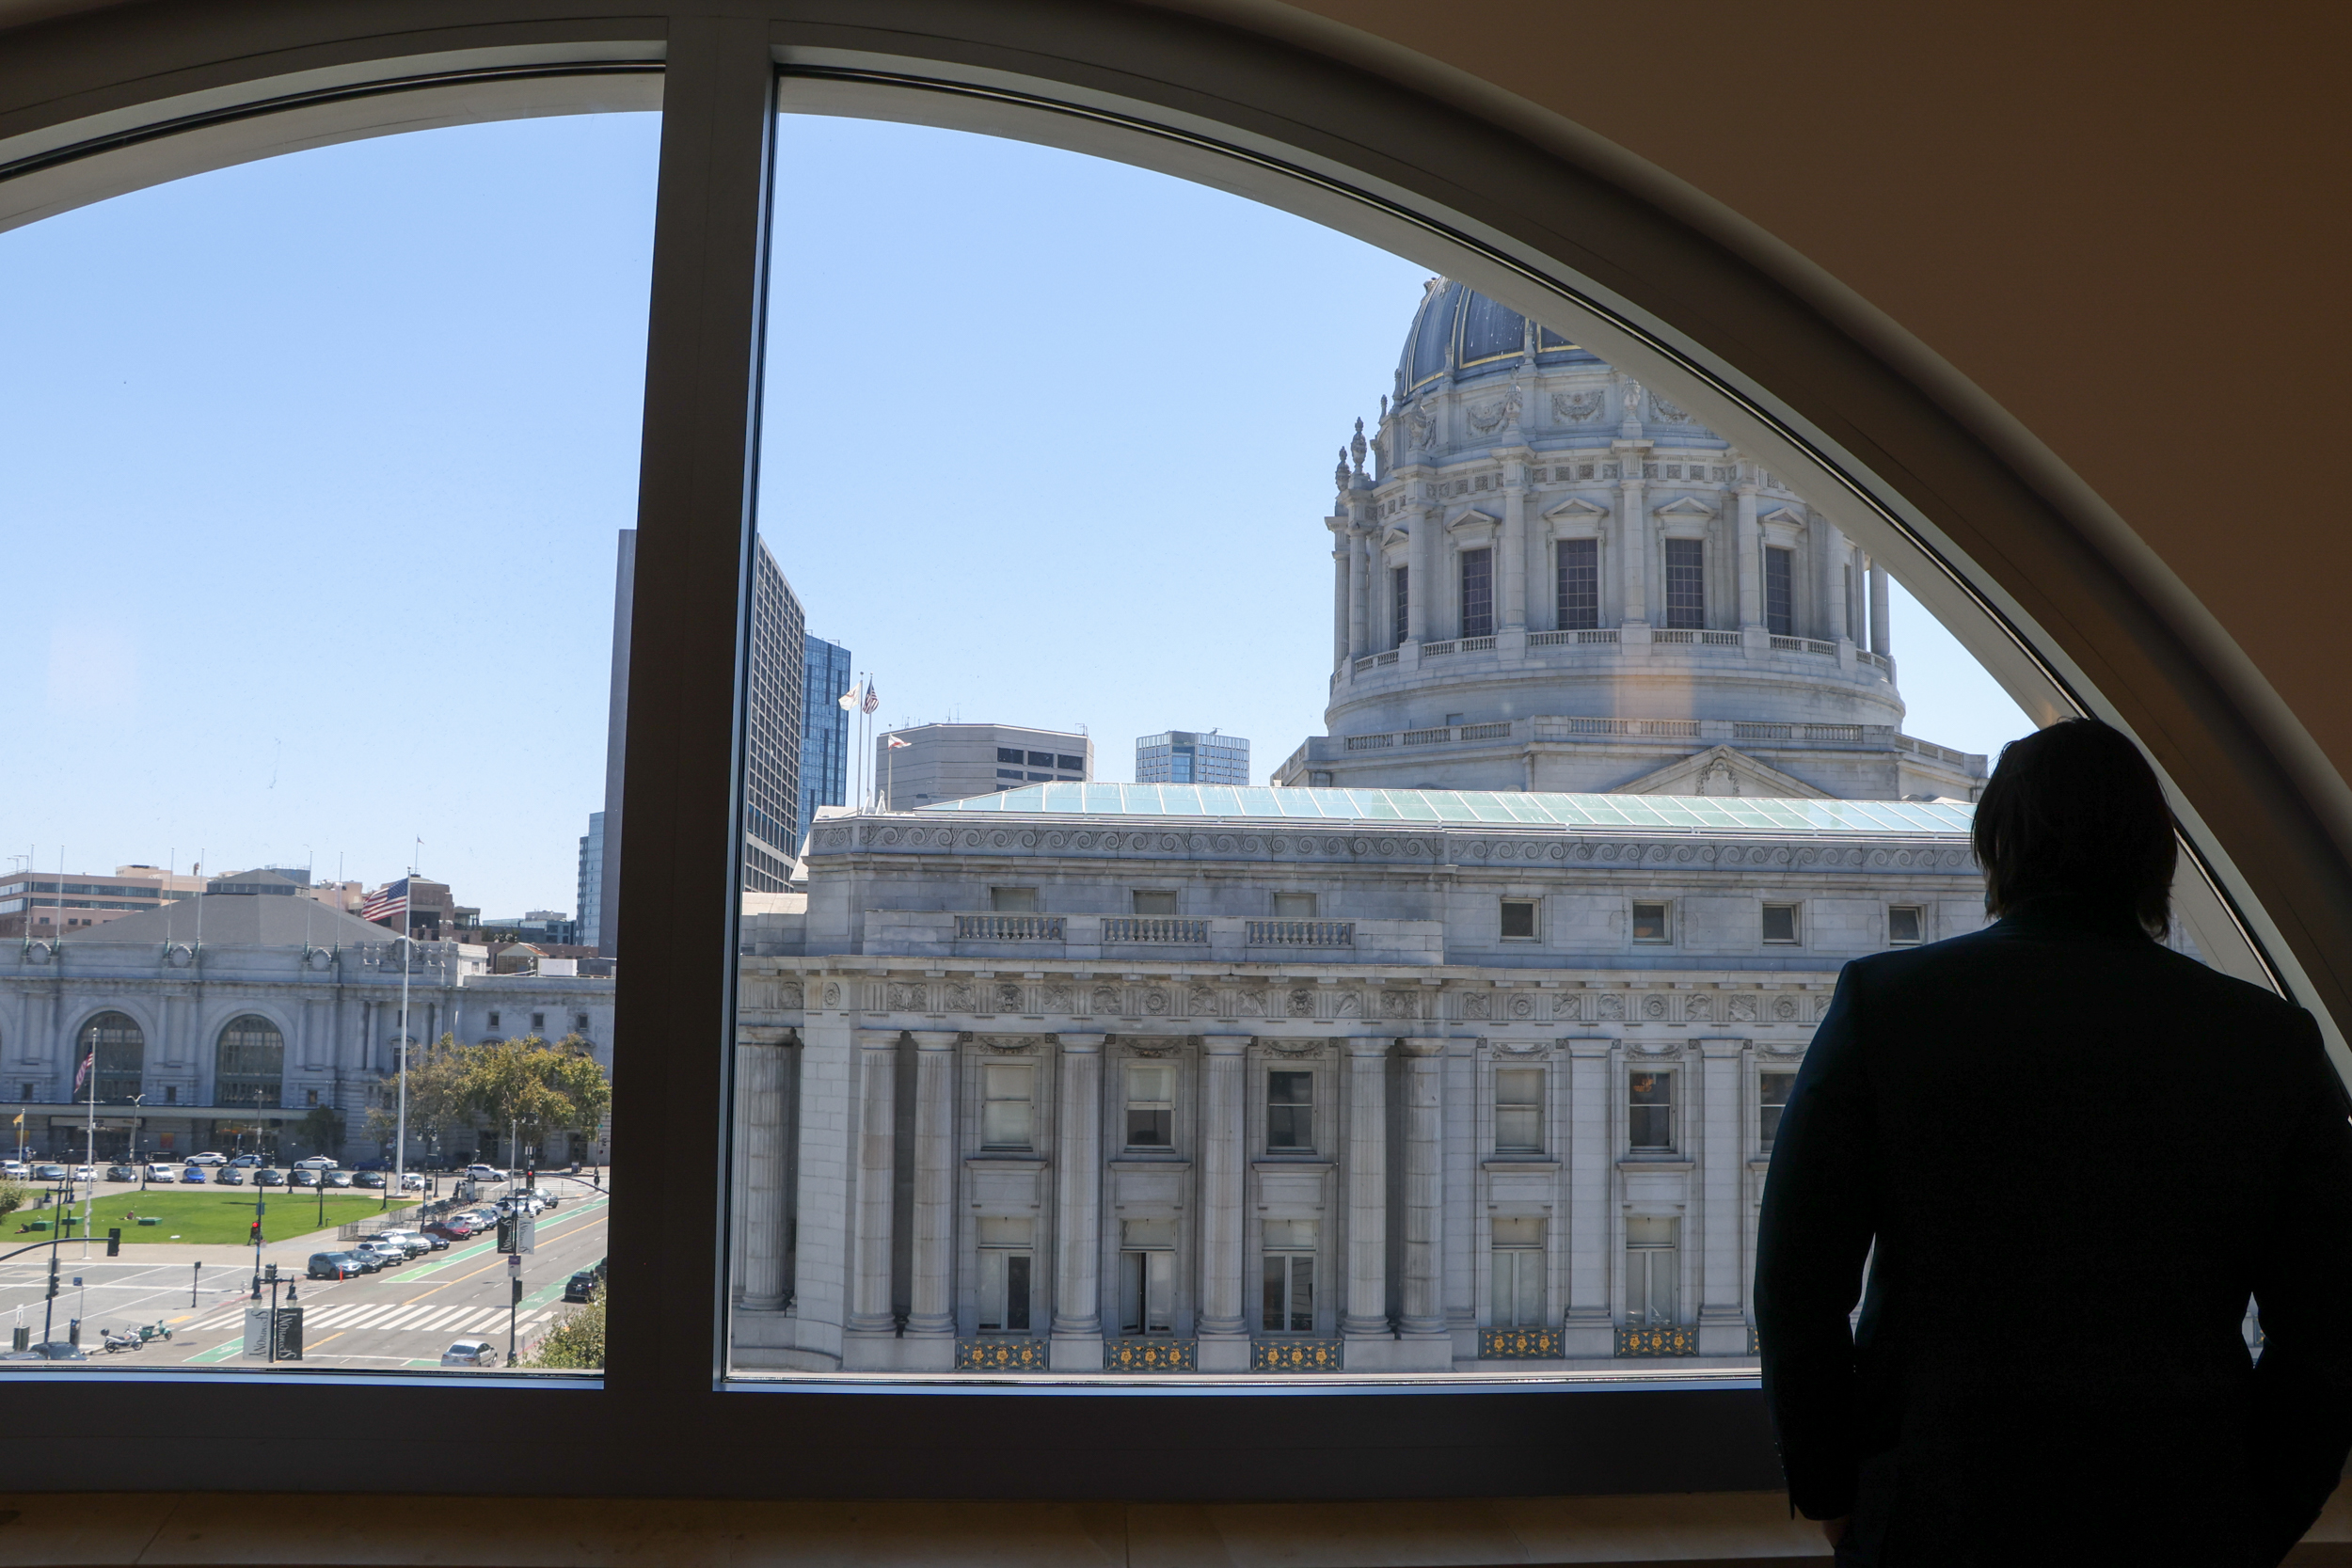 San Francisco's Civic Center, including City Hall, is viewed through a semicircular courthouse window.